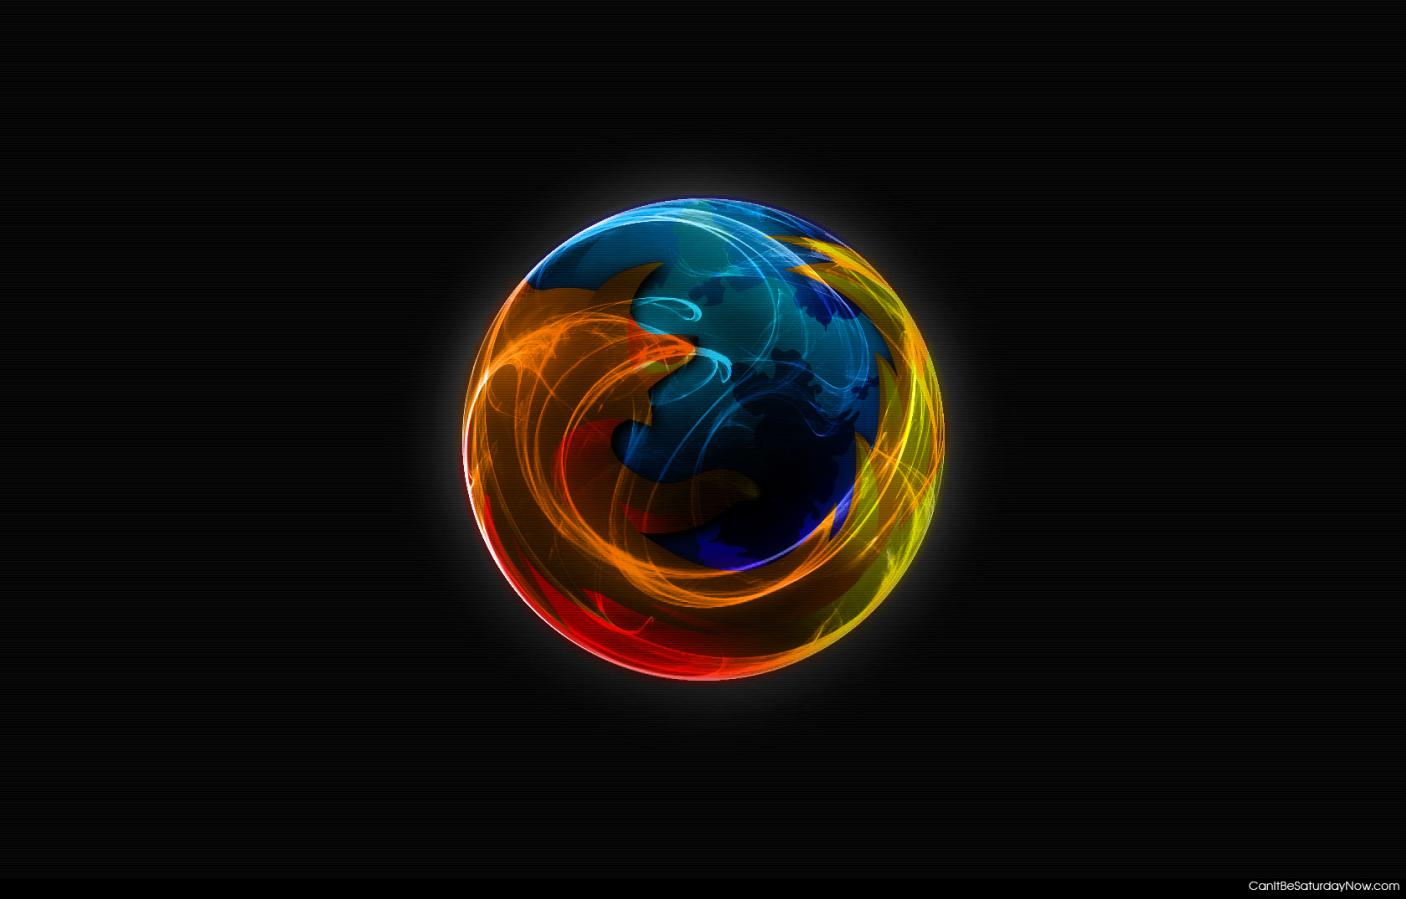 Firefox light - Firefox logo with some light effects behind it